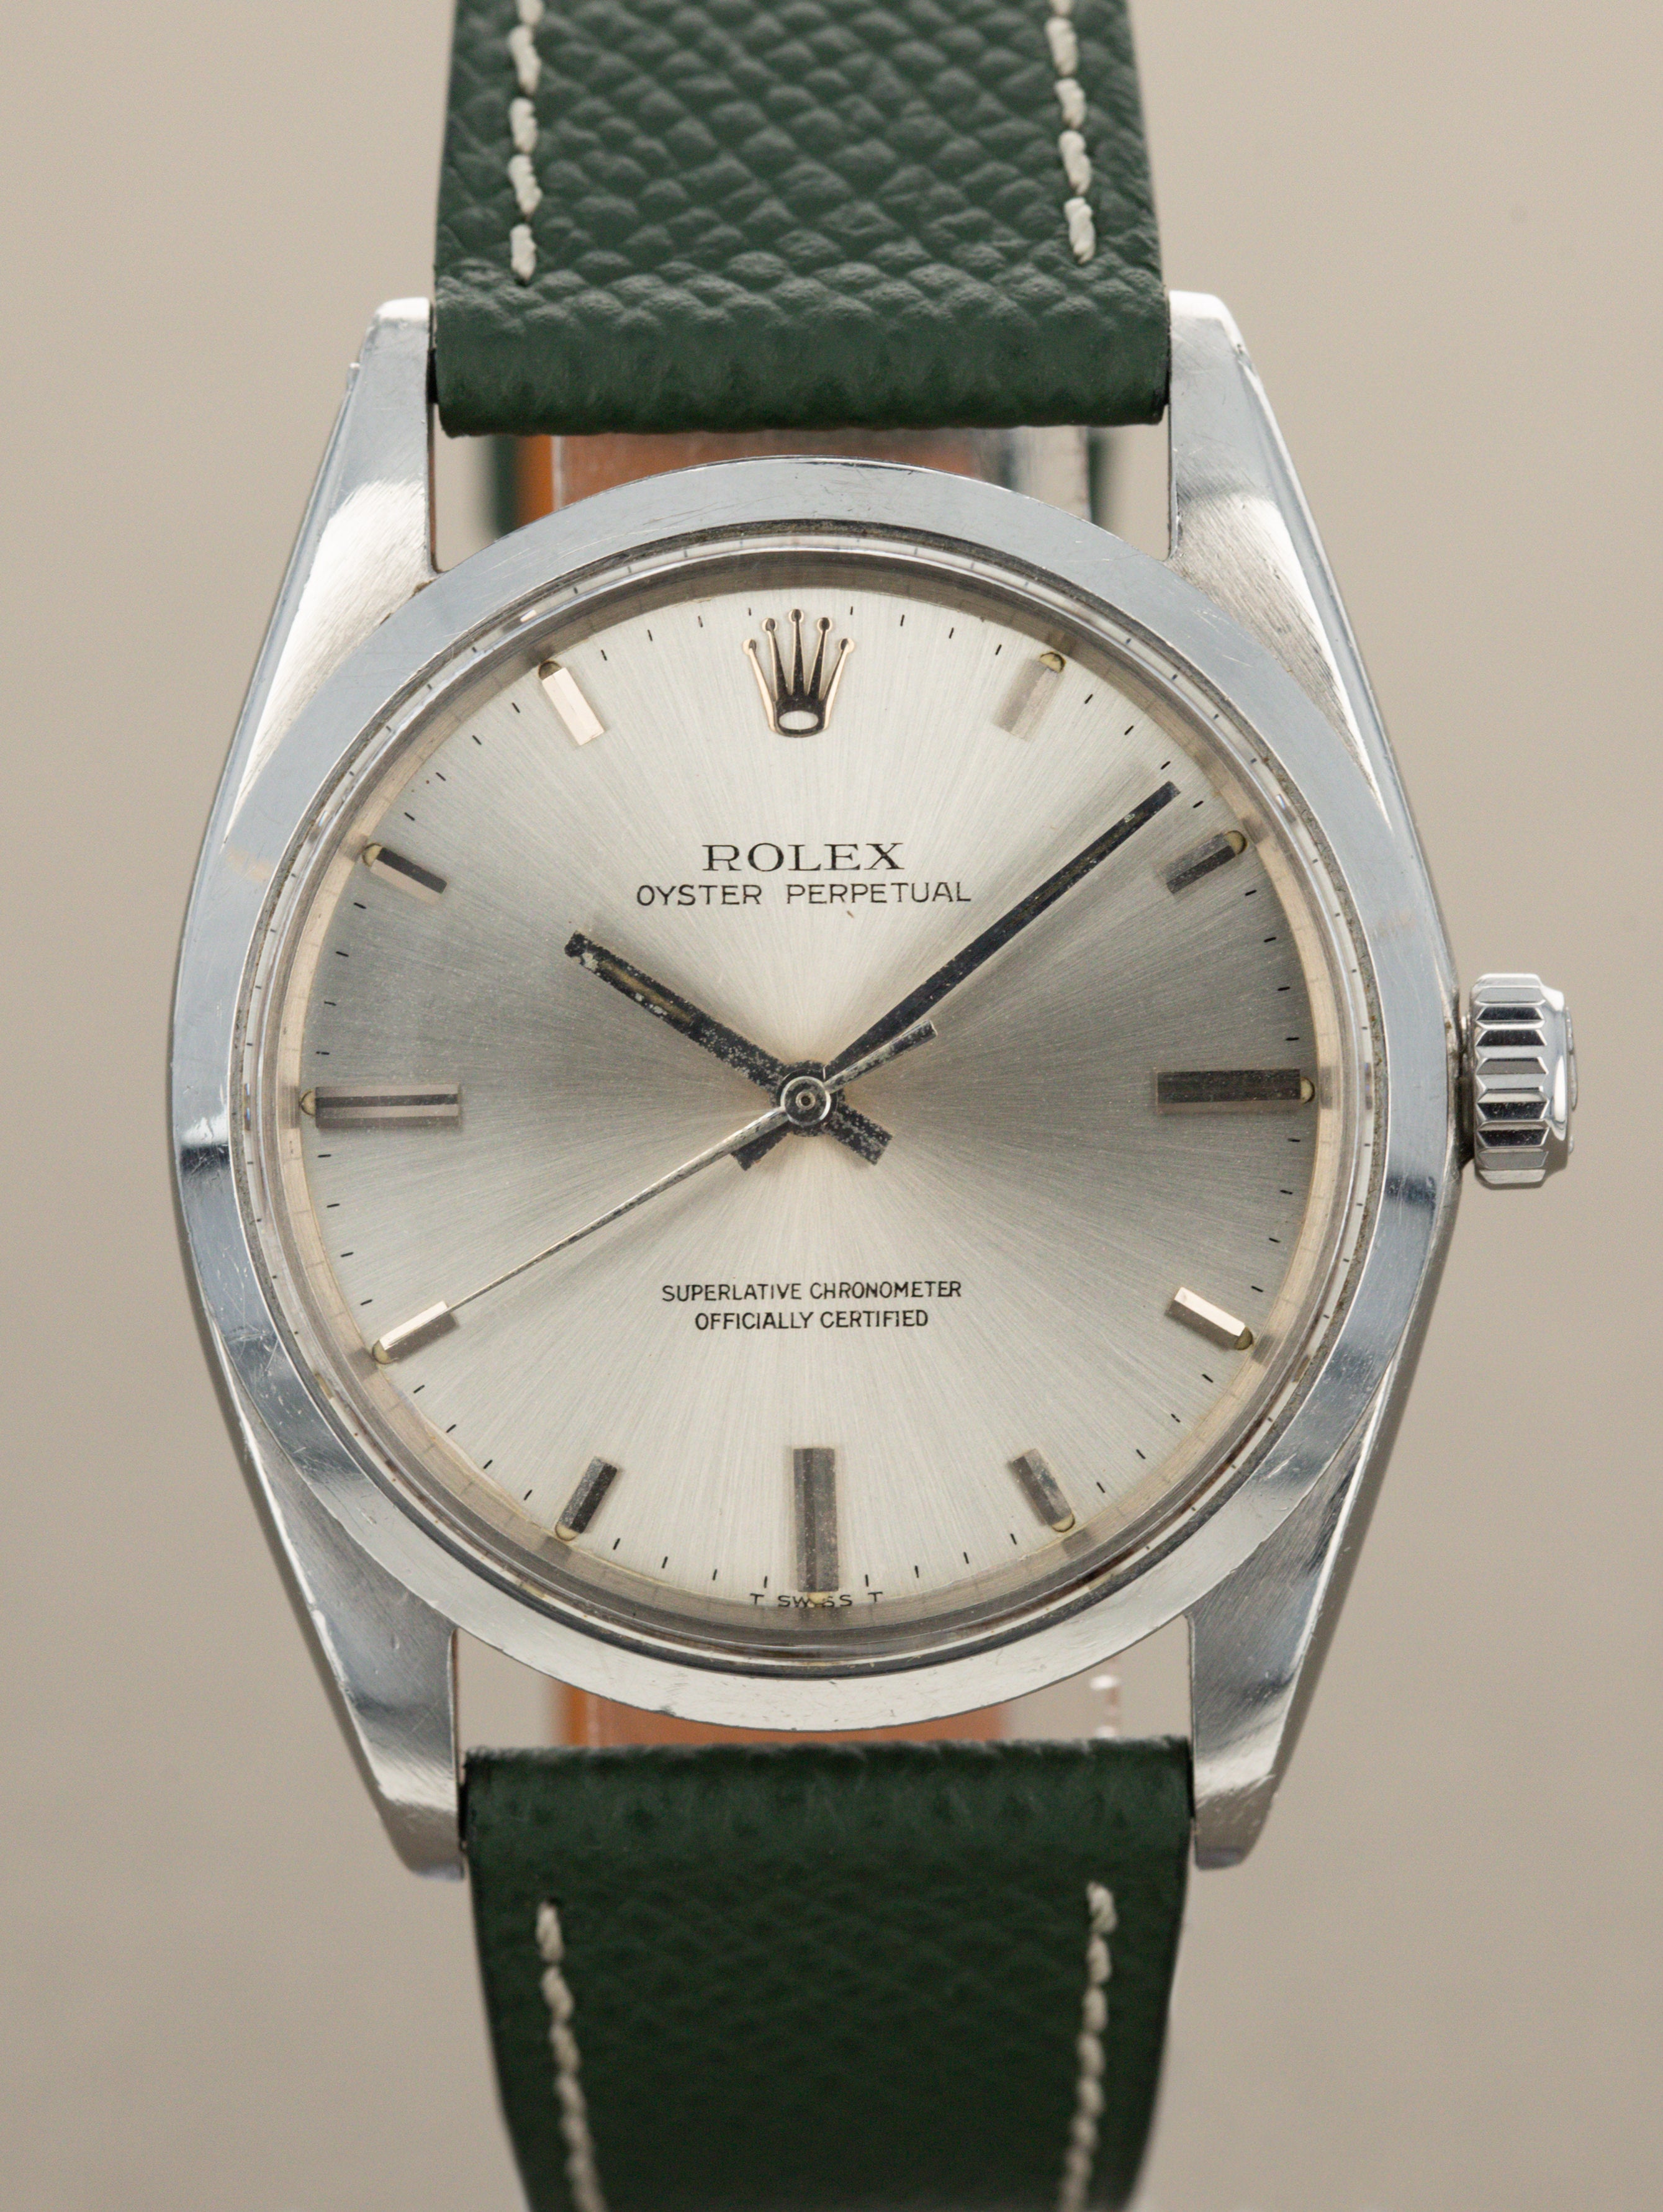 Rolex Oyster Perpetual Ref. 1018